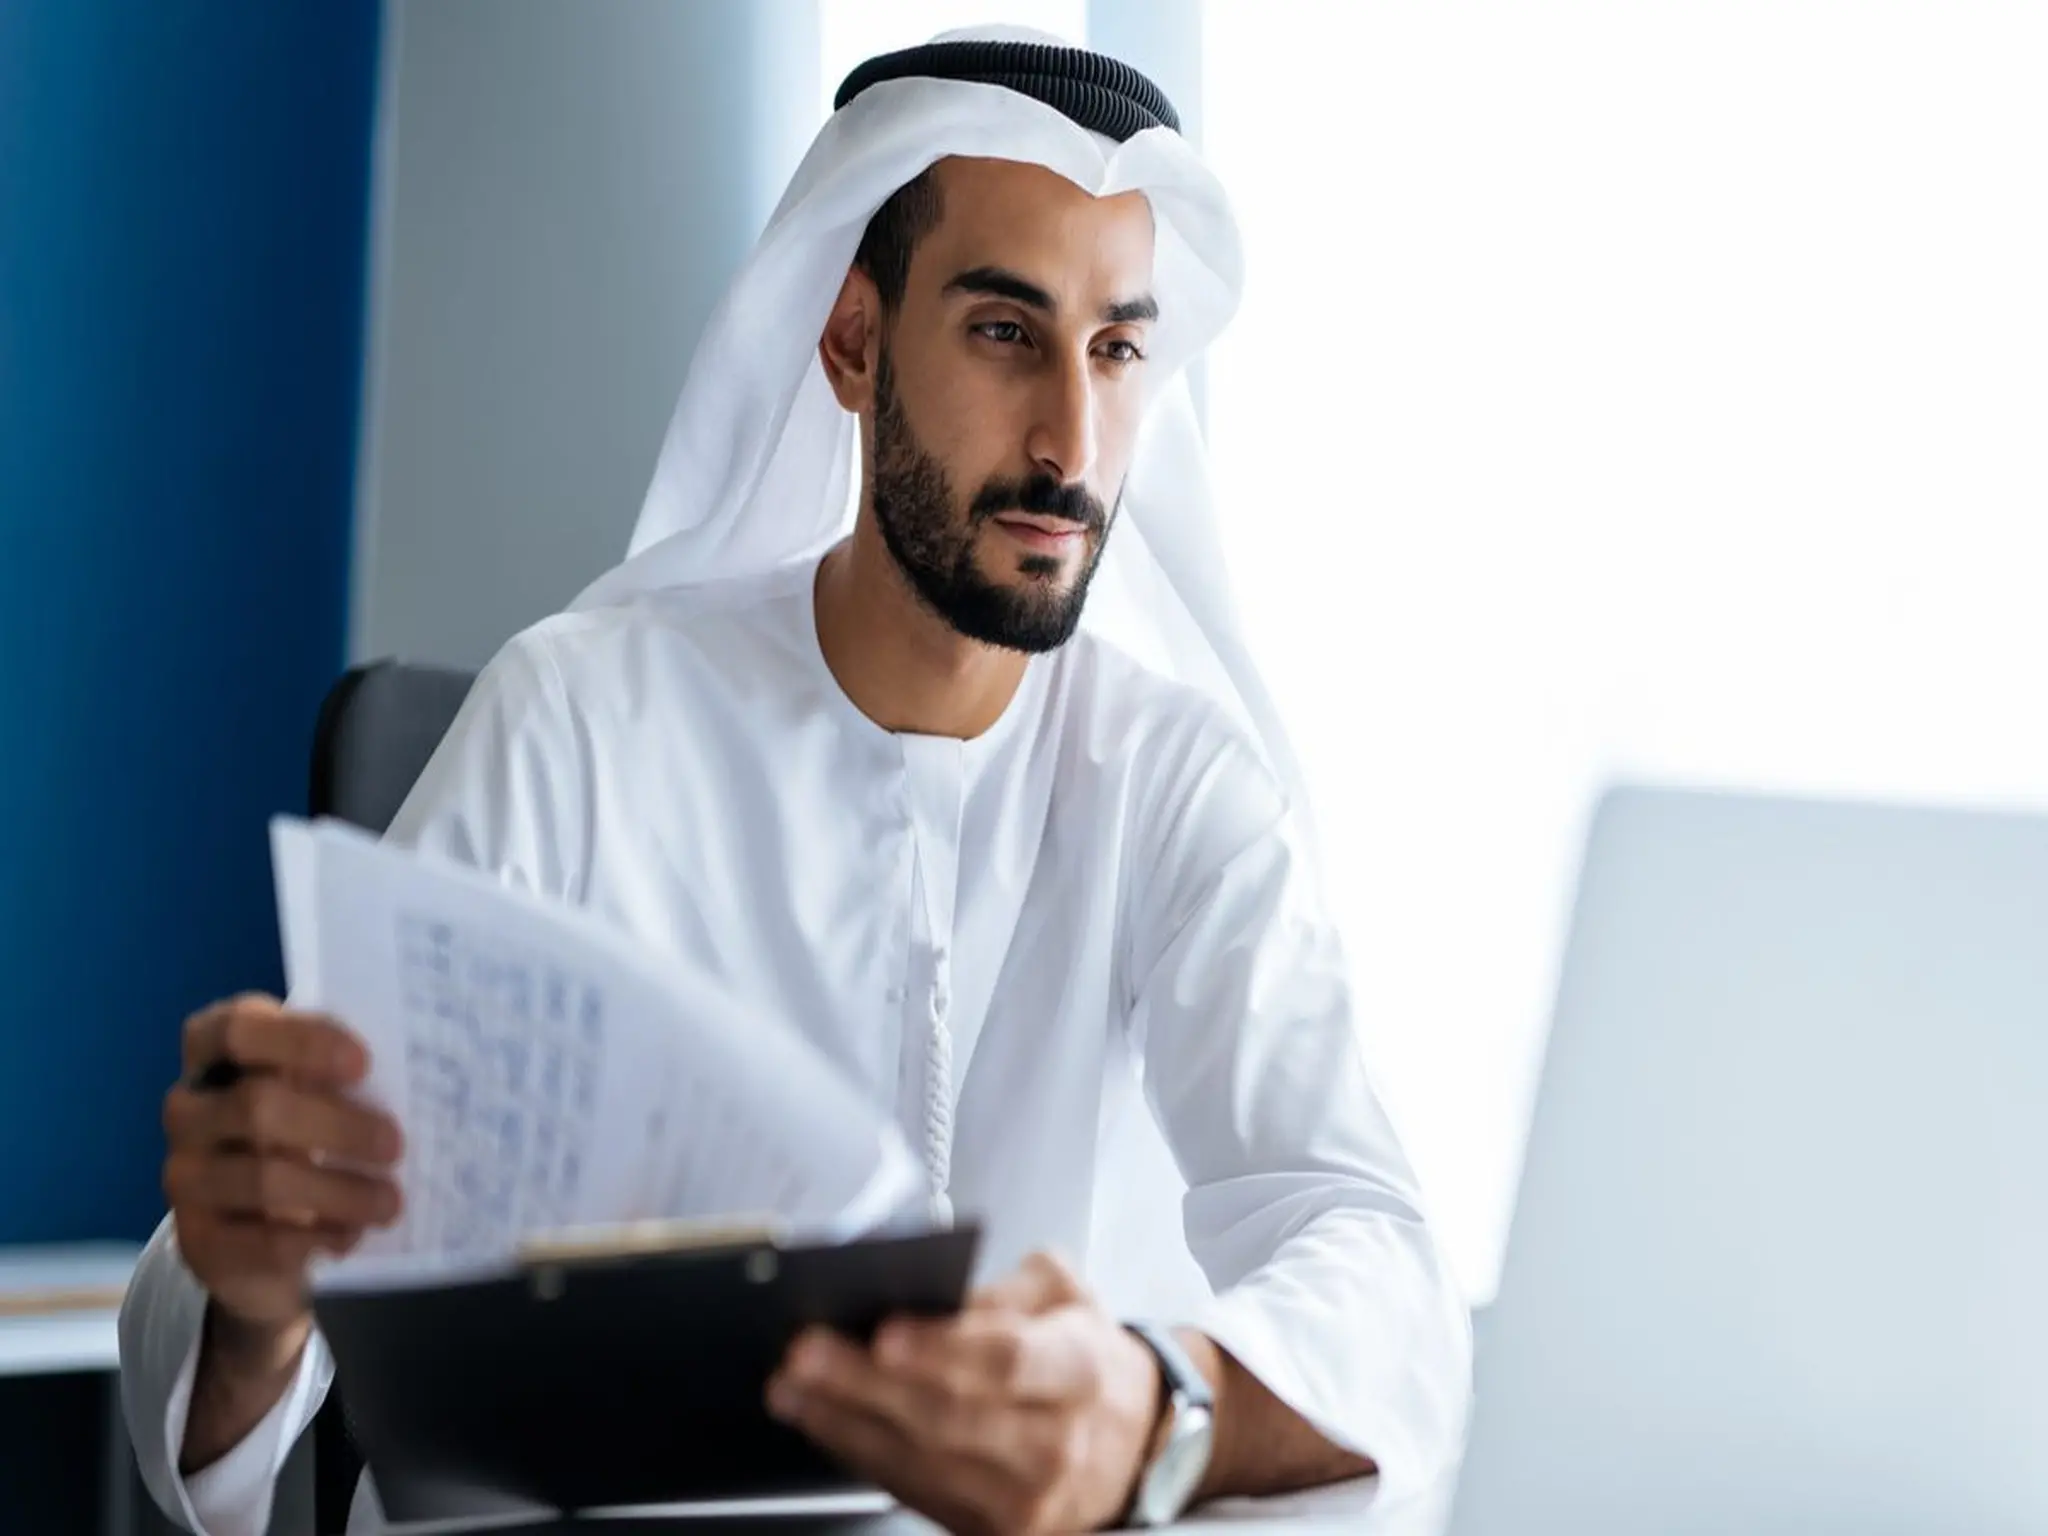 UAE : many job openings During the summer, with vacancies in real estate, BPOs, banks